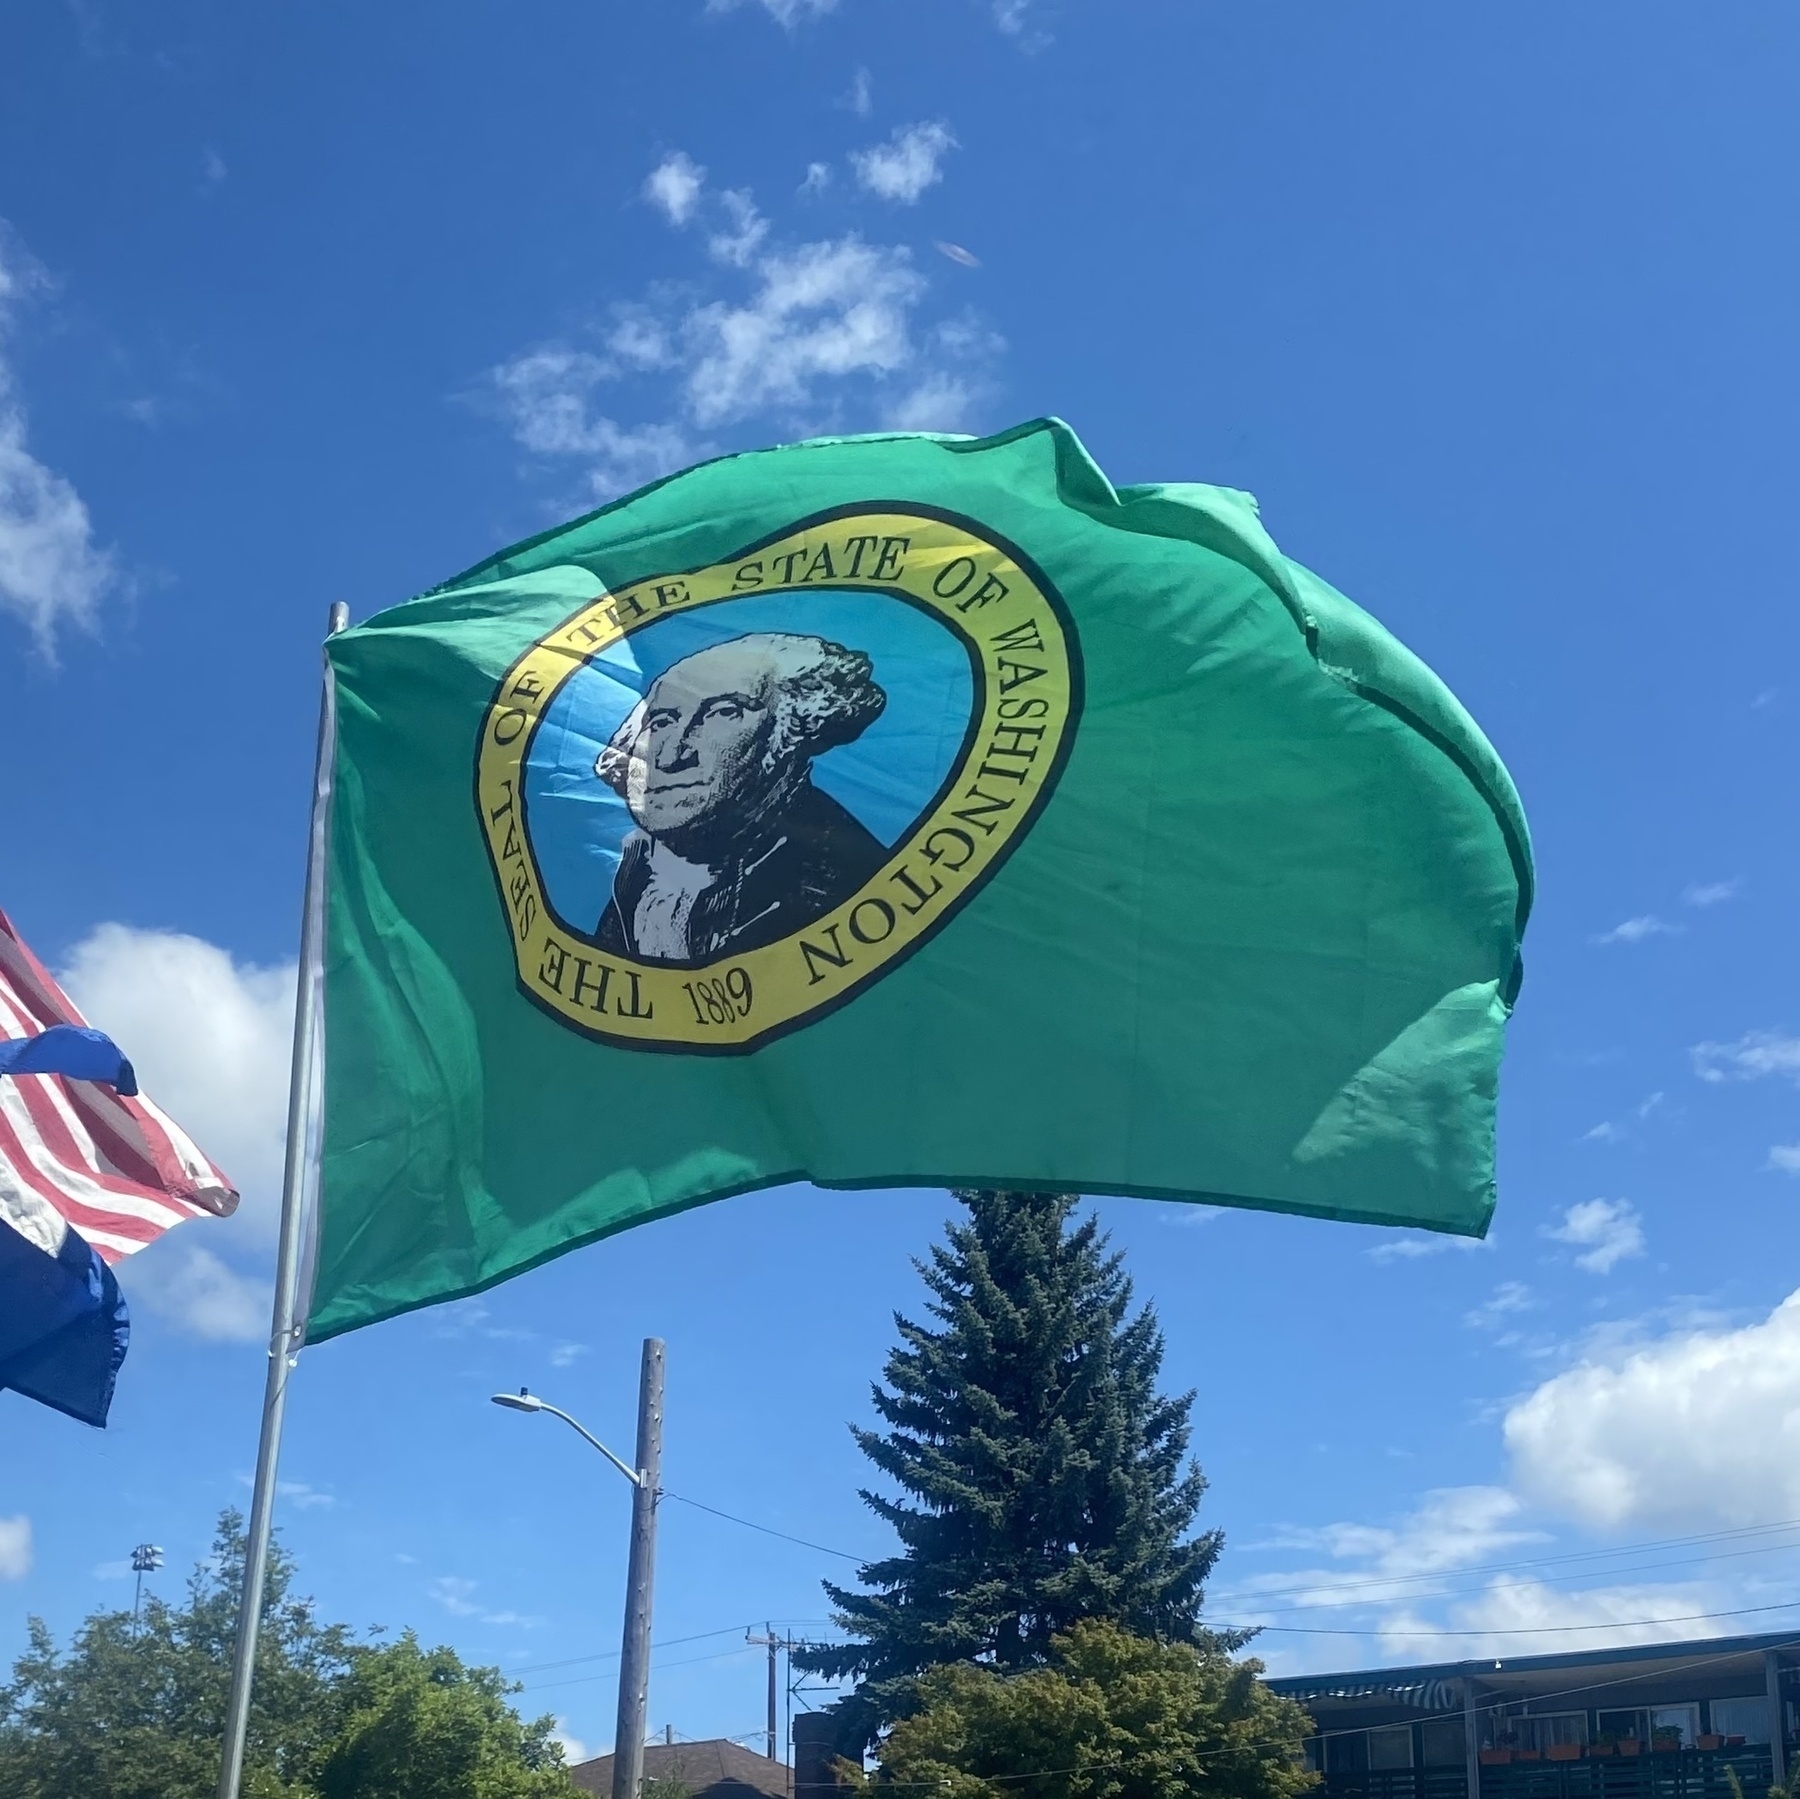 George Washington blowing in the wind on the Washington state flag.